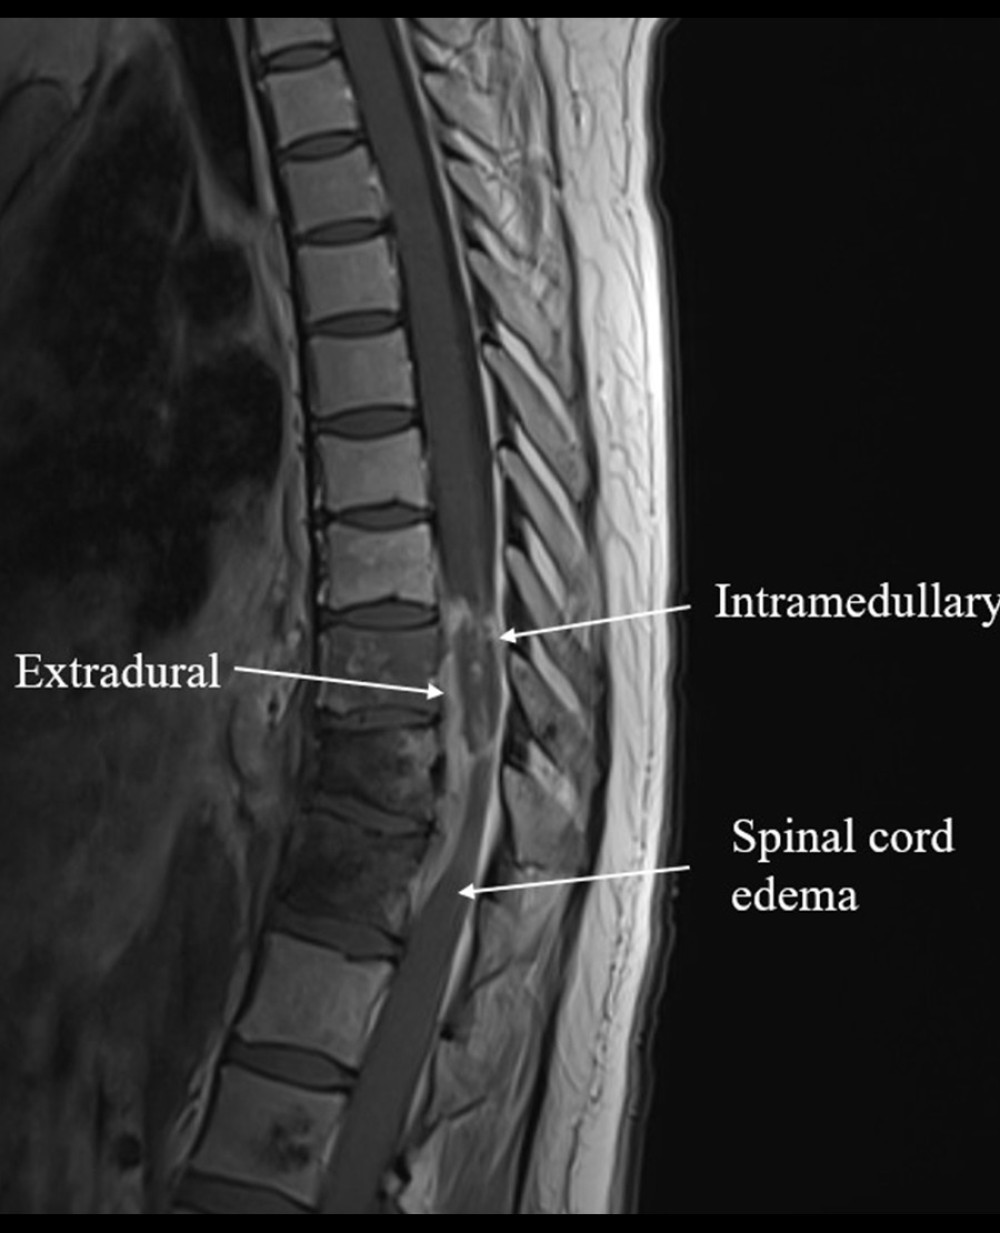 First spine MRI with contrast, T1 sequence sagittal. Distribution of metastases in a length of approximately 3.7 cm extradurally, intradurally, and intramedullary, causing spinal cord edema and compression.